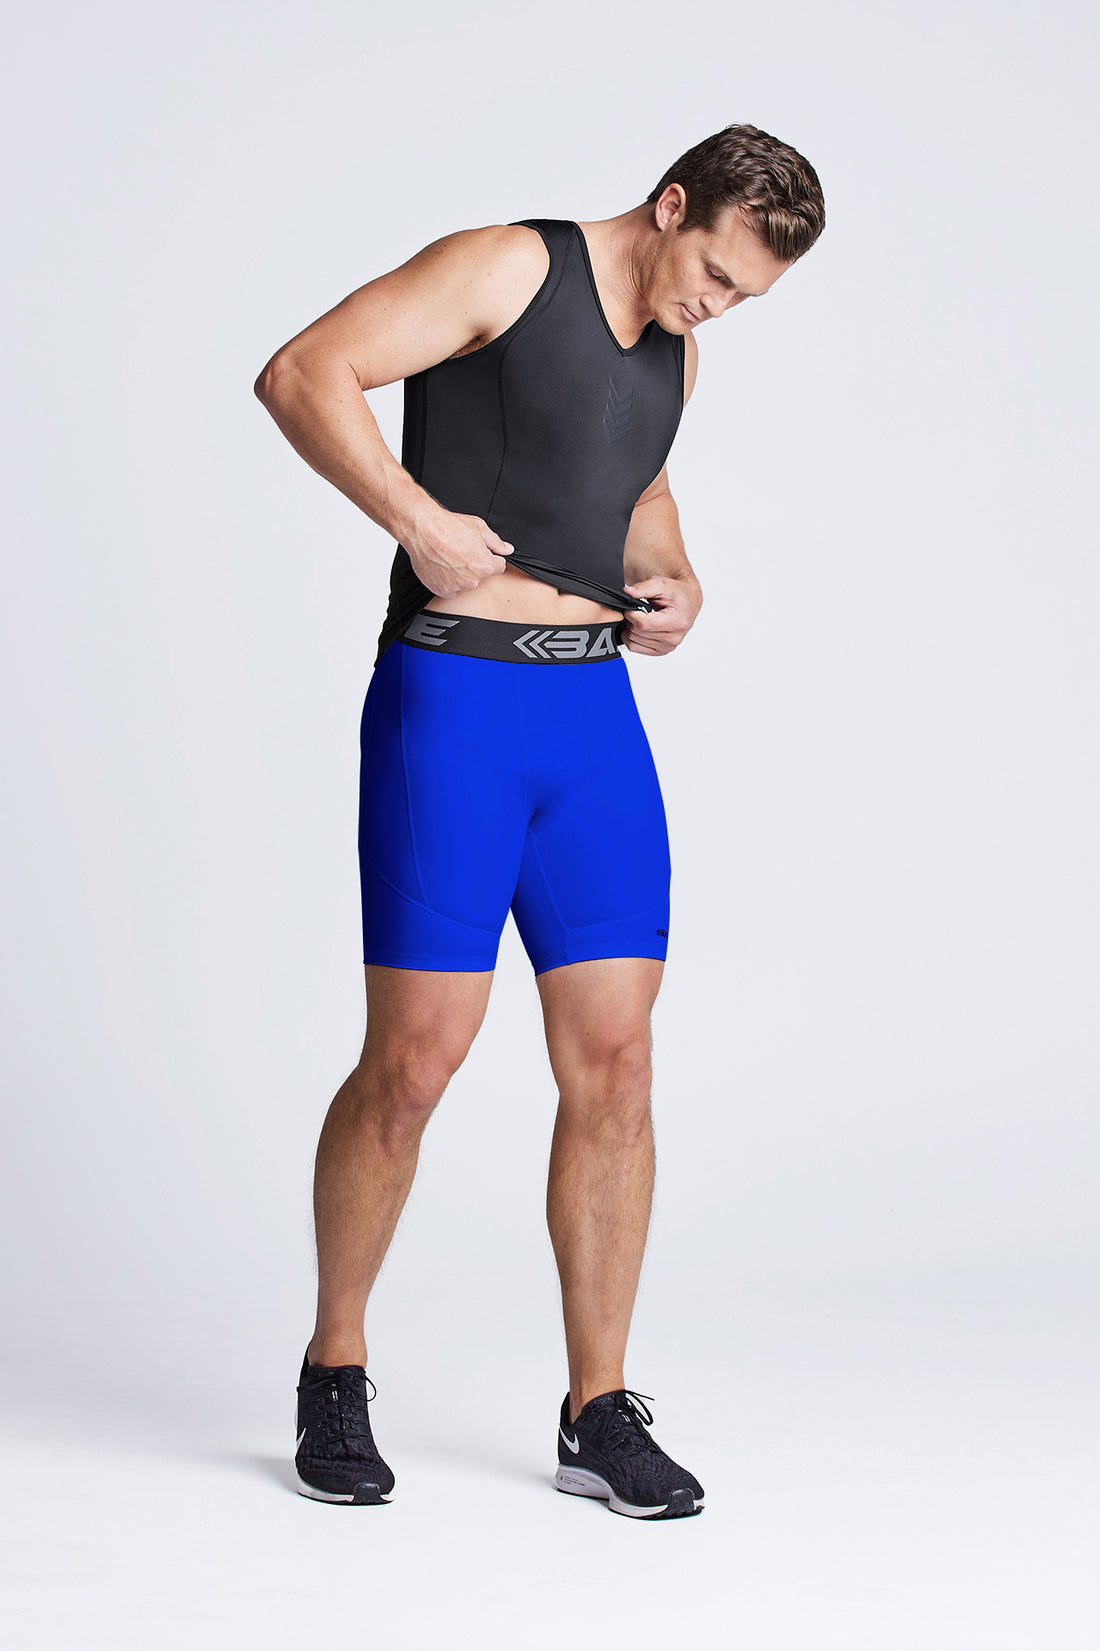 MENS SPORTS CLOTHING - COMPRESSION - Totally Sports & Surf